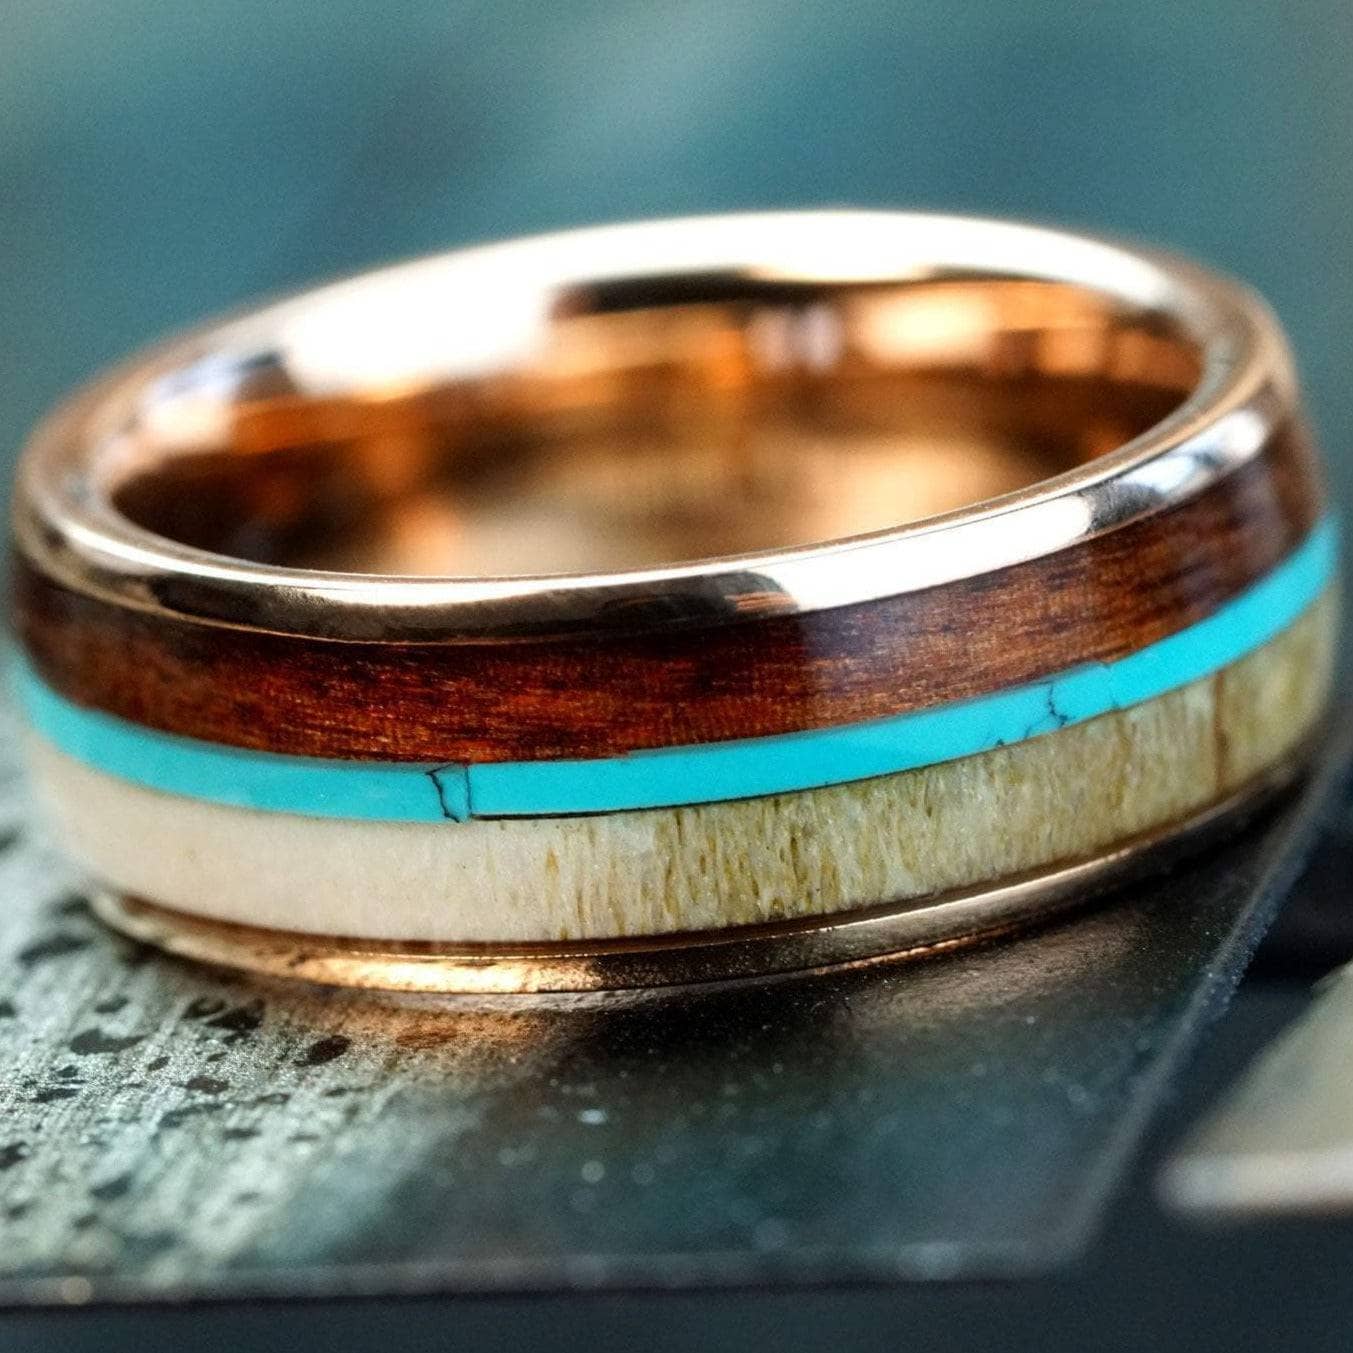 The Journeyman - Men's Wedding Rings - Manly Bands